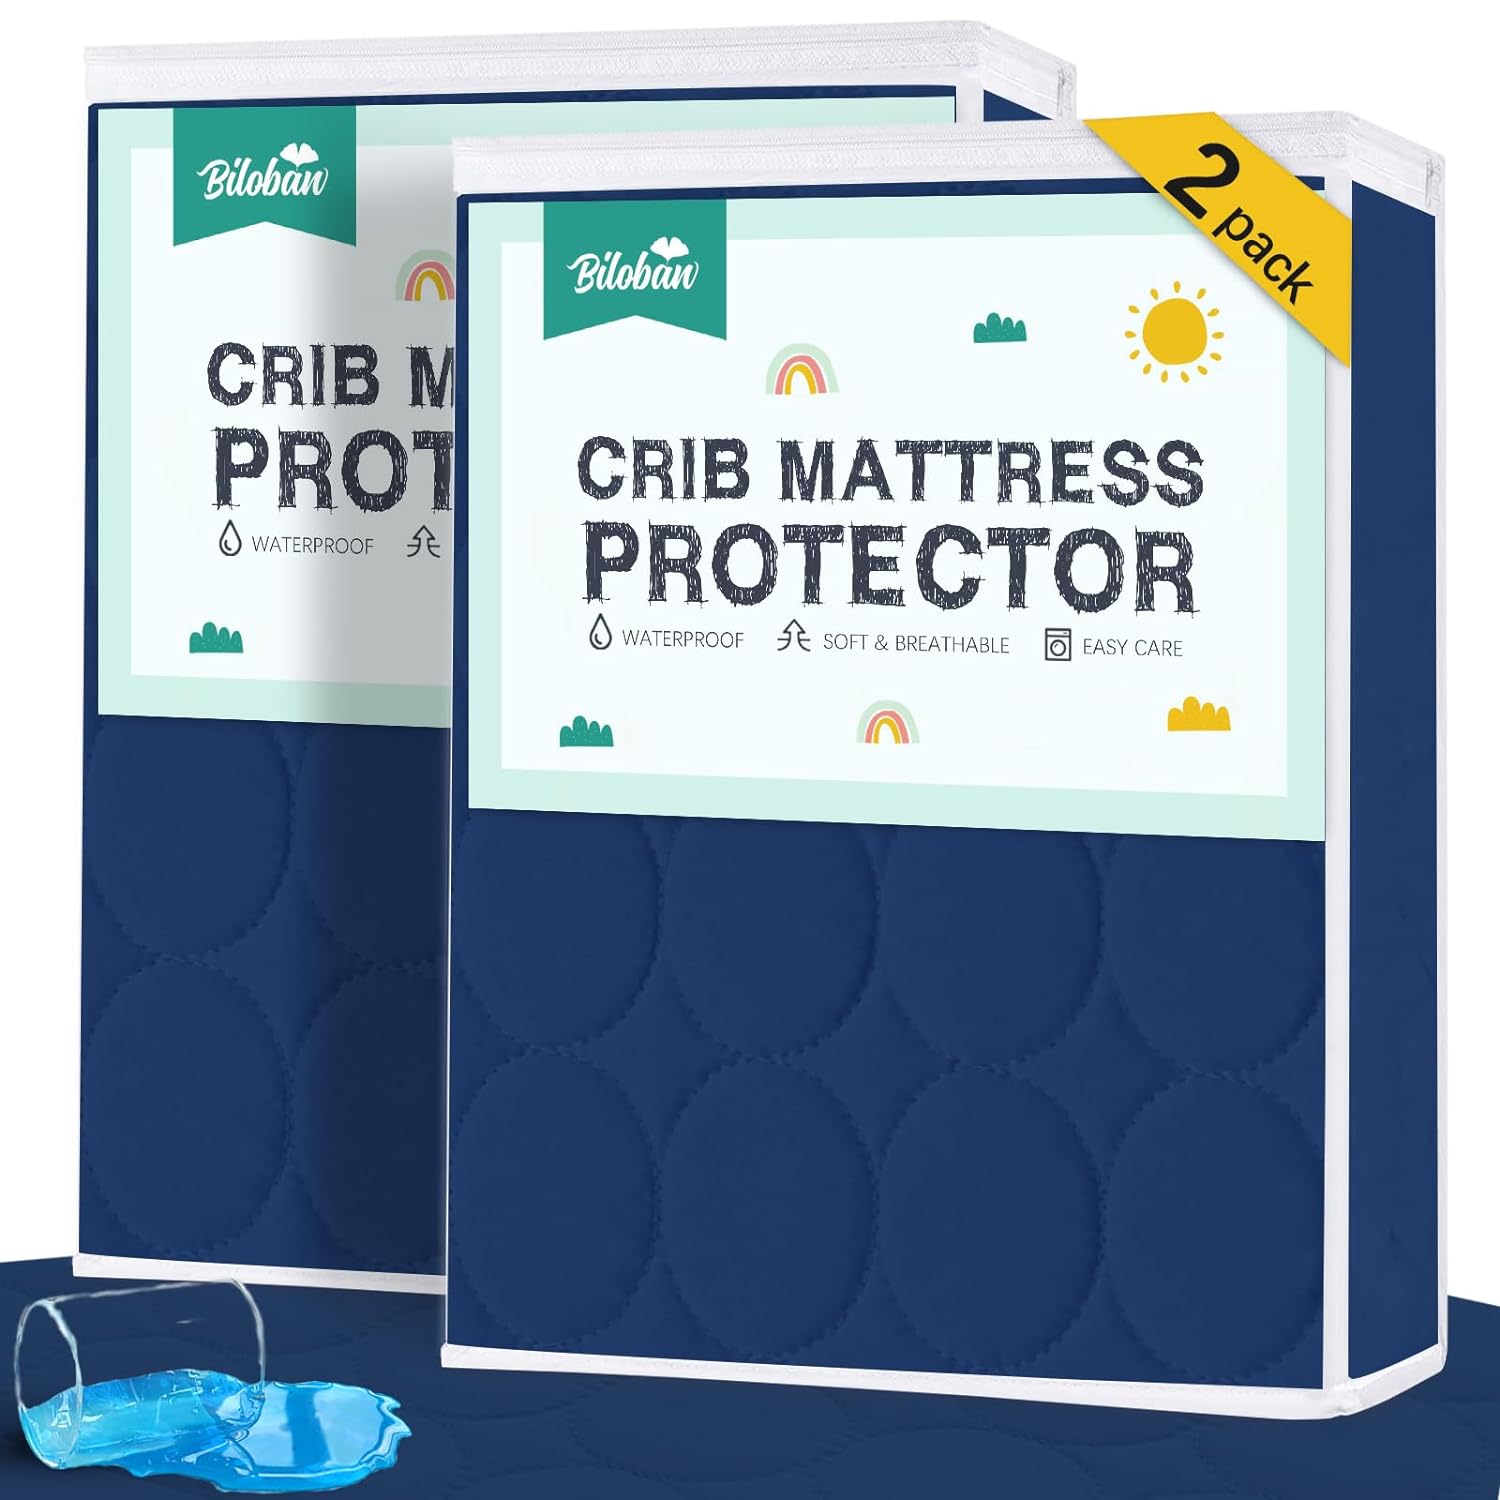 Crib Mattress Protector/ Pad Cover - 2 Pack, Quilted Microfiber, Waterproof (for Standard Crib/ Toddler Bed), Navy - Biloban Online Store